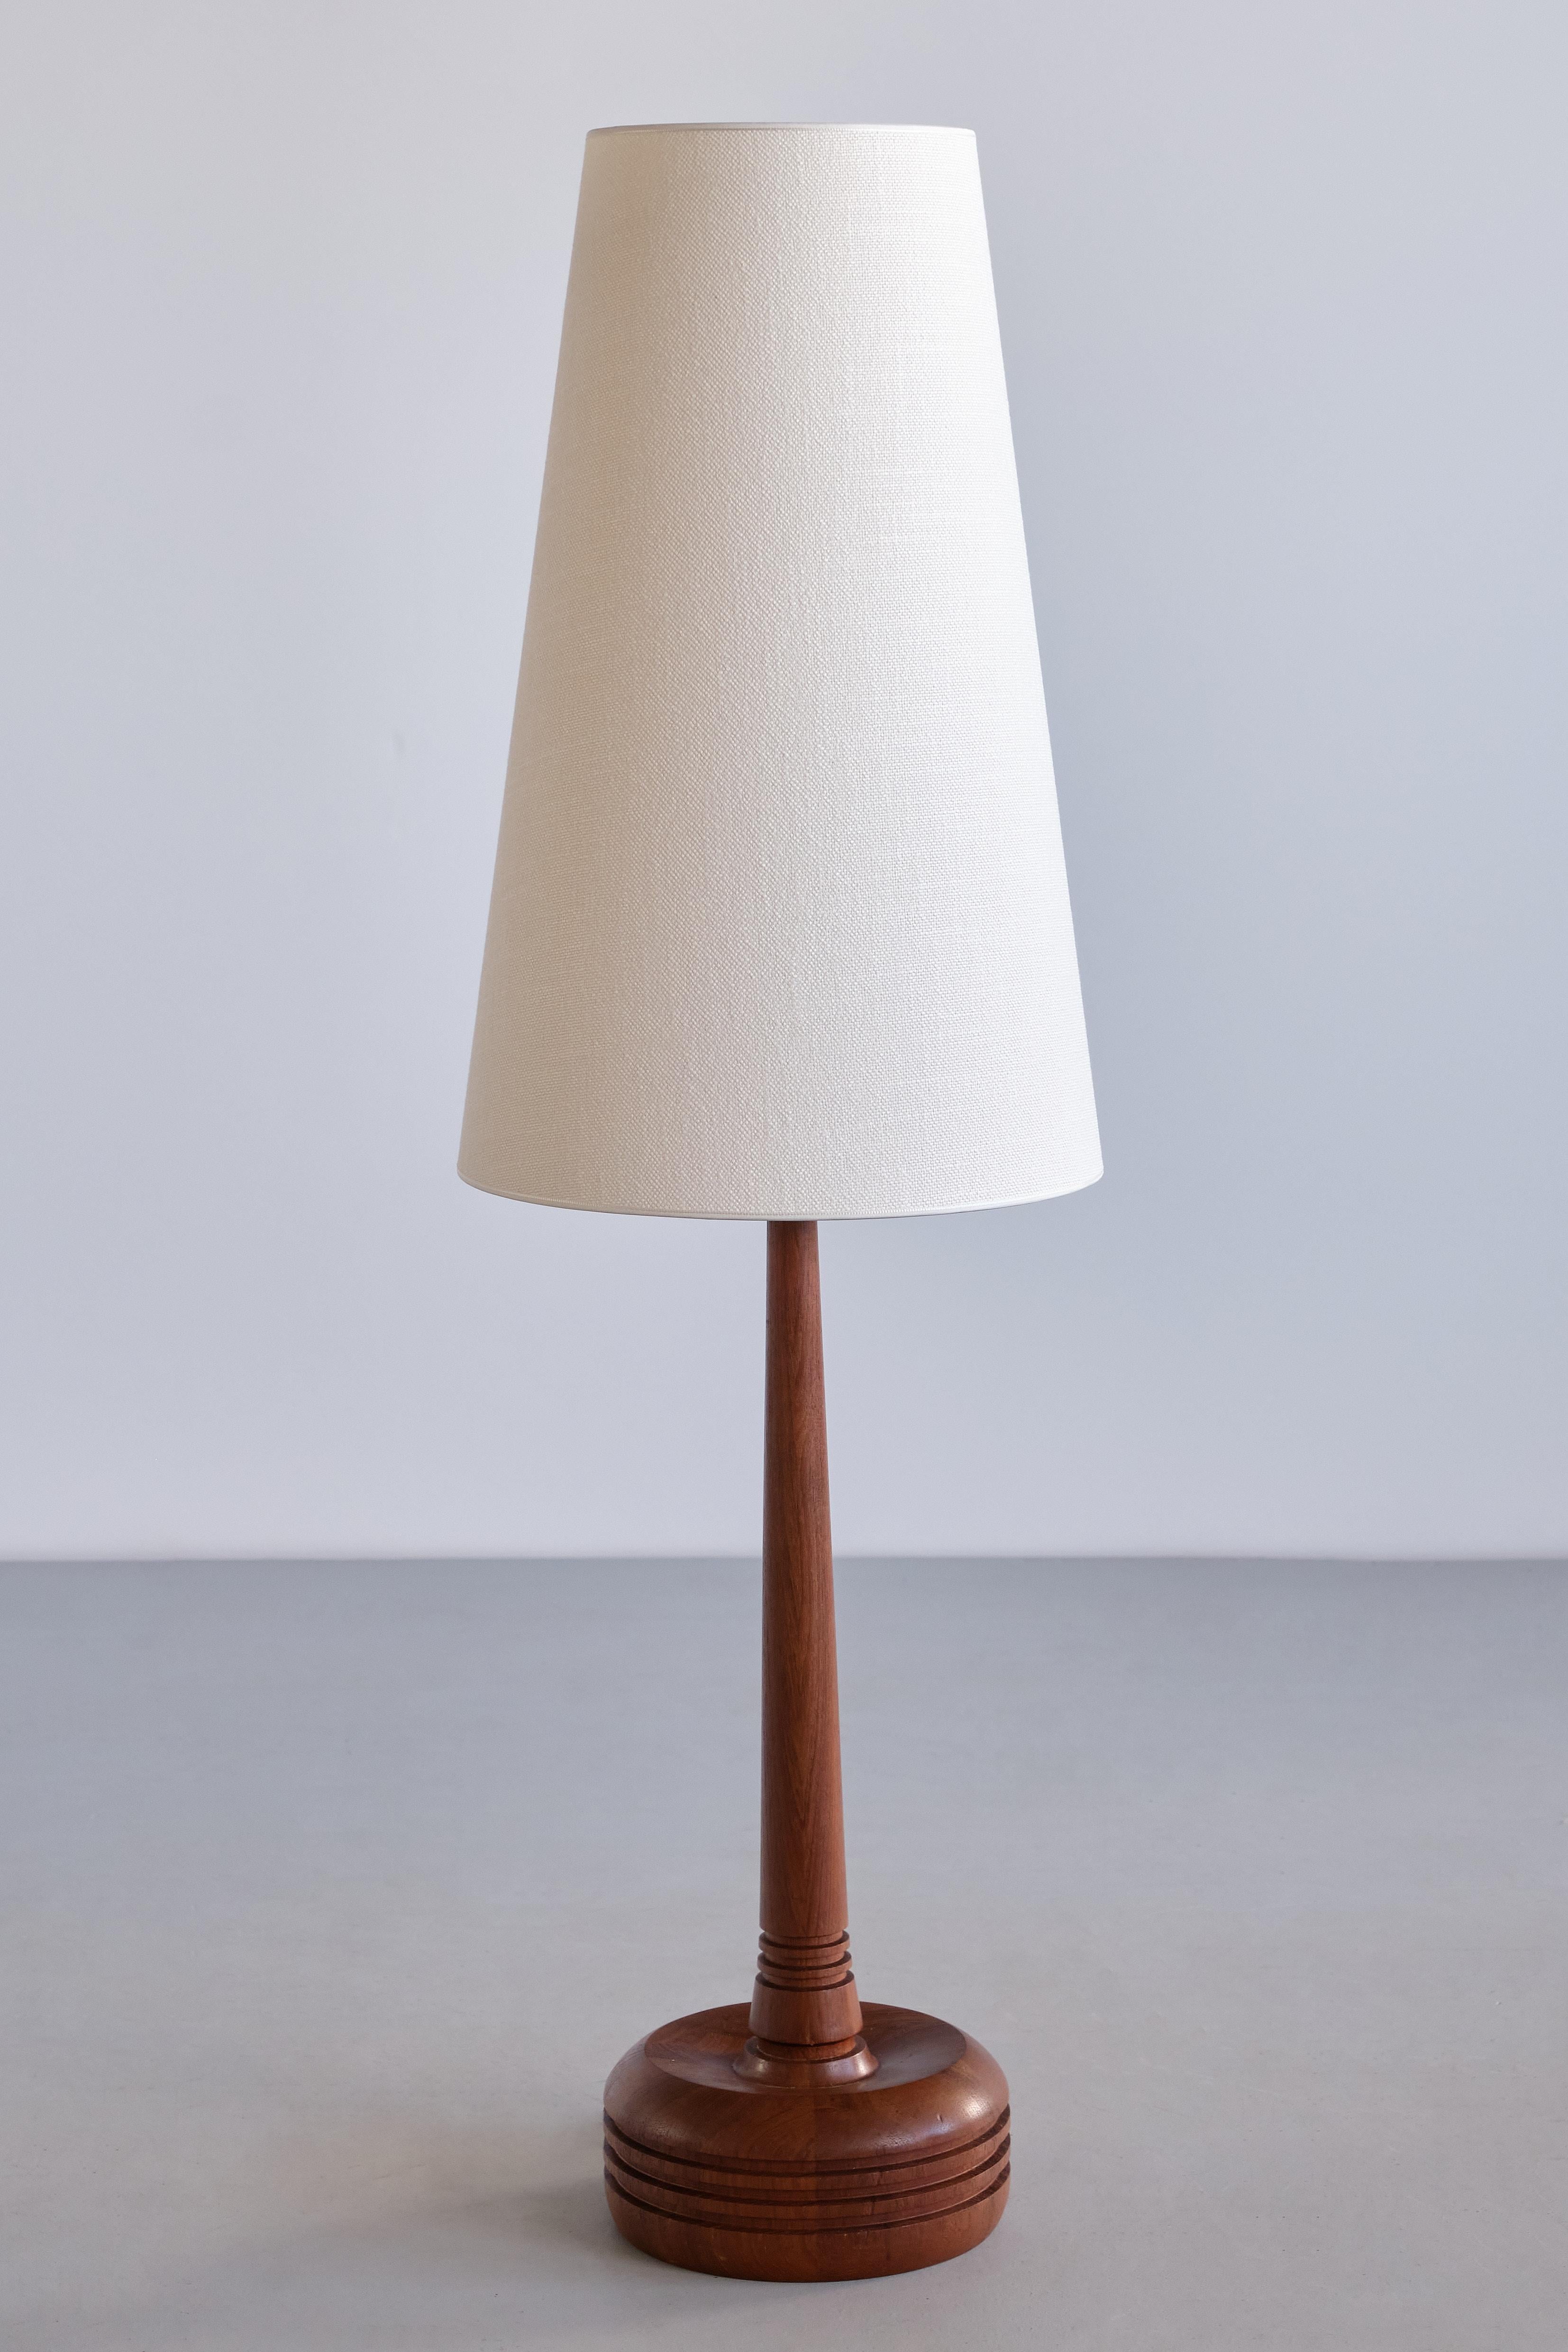 Mid-20th Century Tall Stilarmatur Tranås Table Lamp in Teak Wood with Cone Shade, Sweden, 1960s For Sale